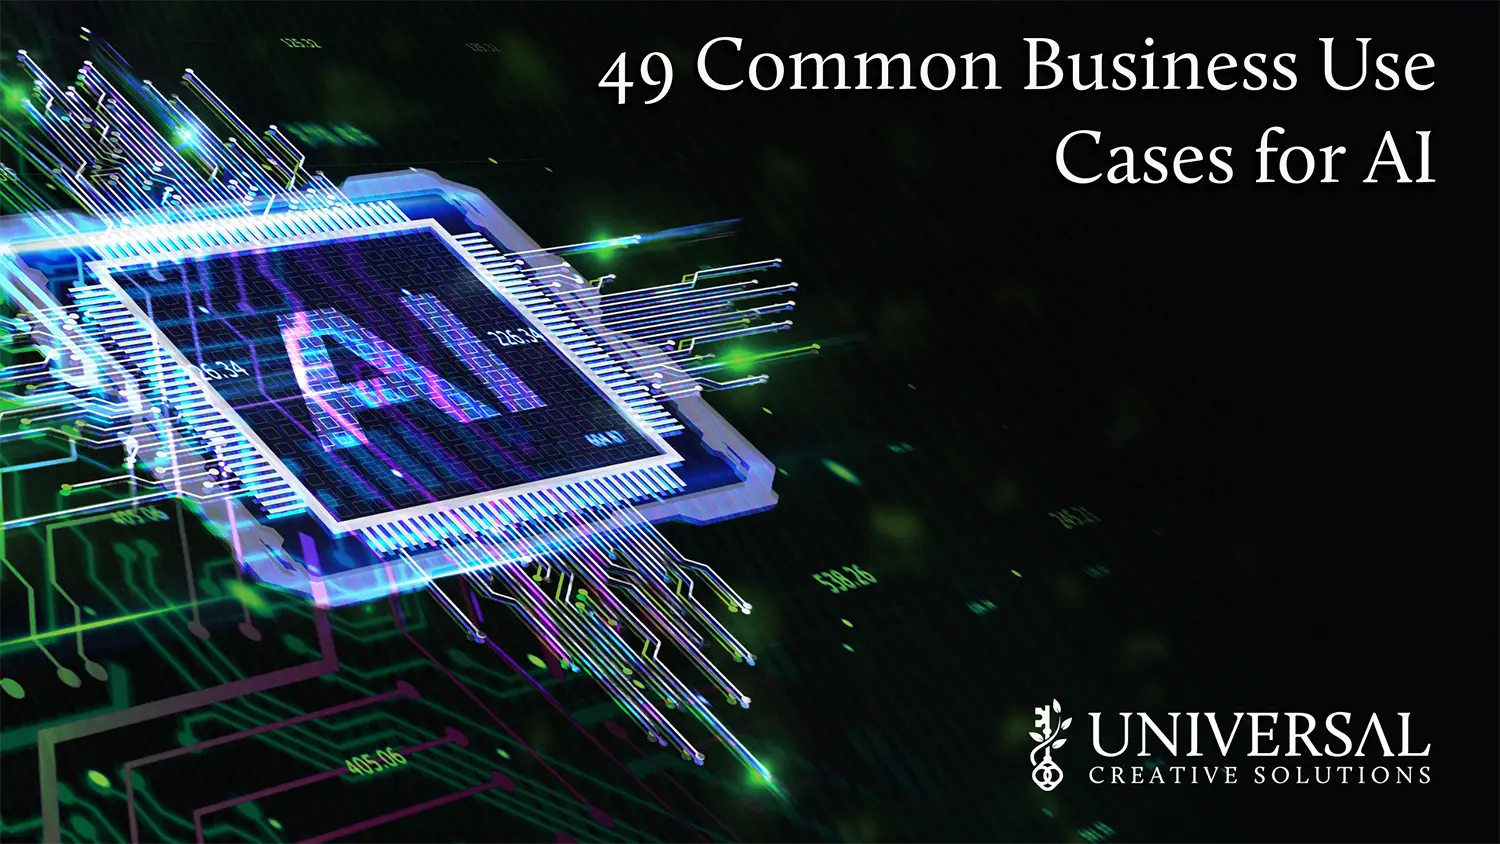 49 Common Business Use Cases for AI